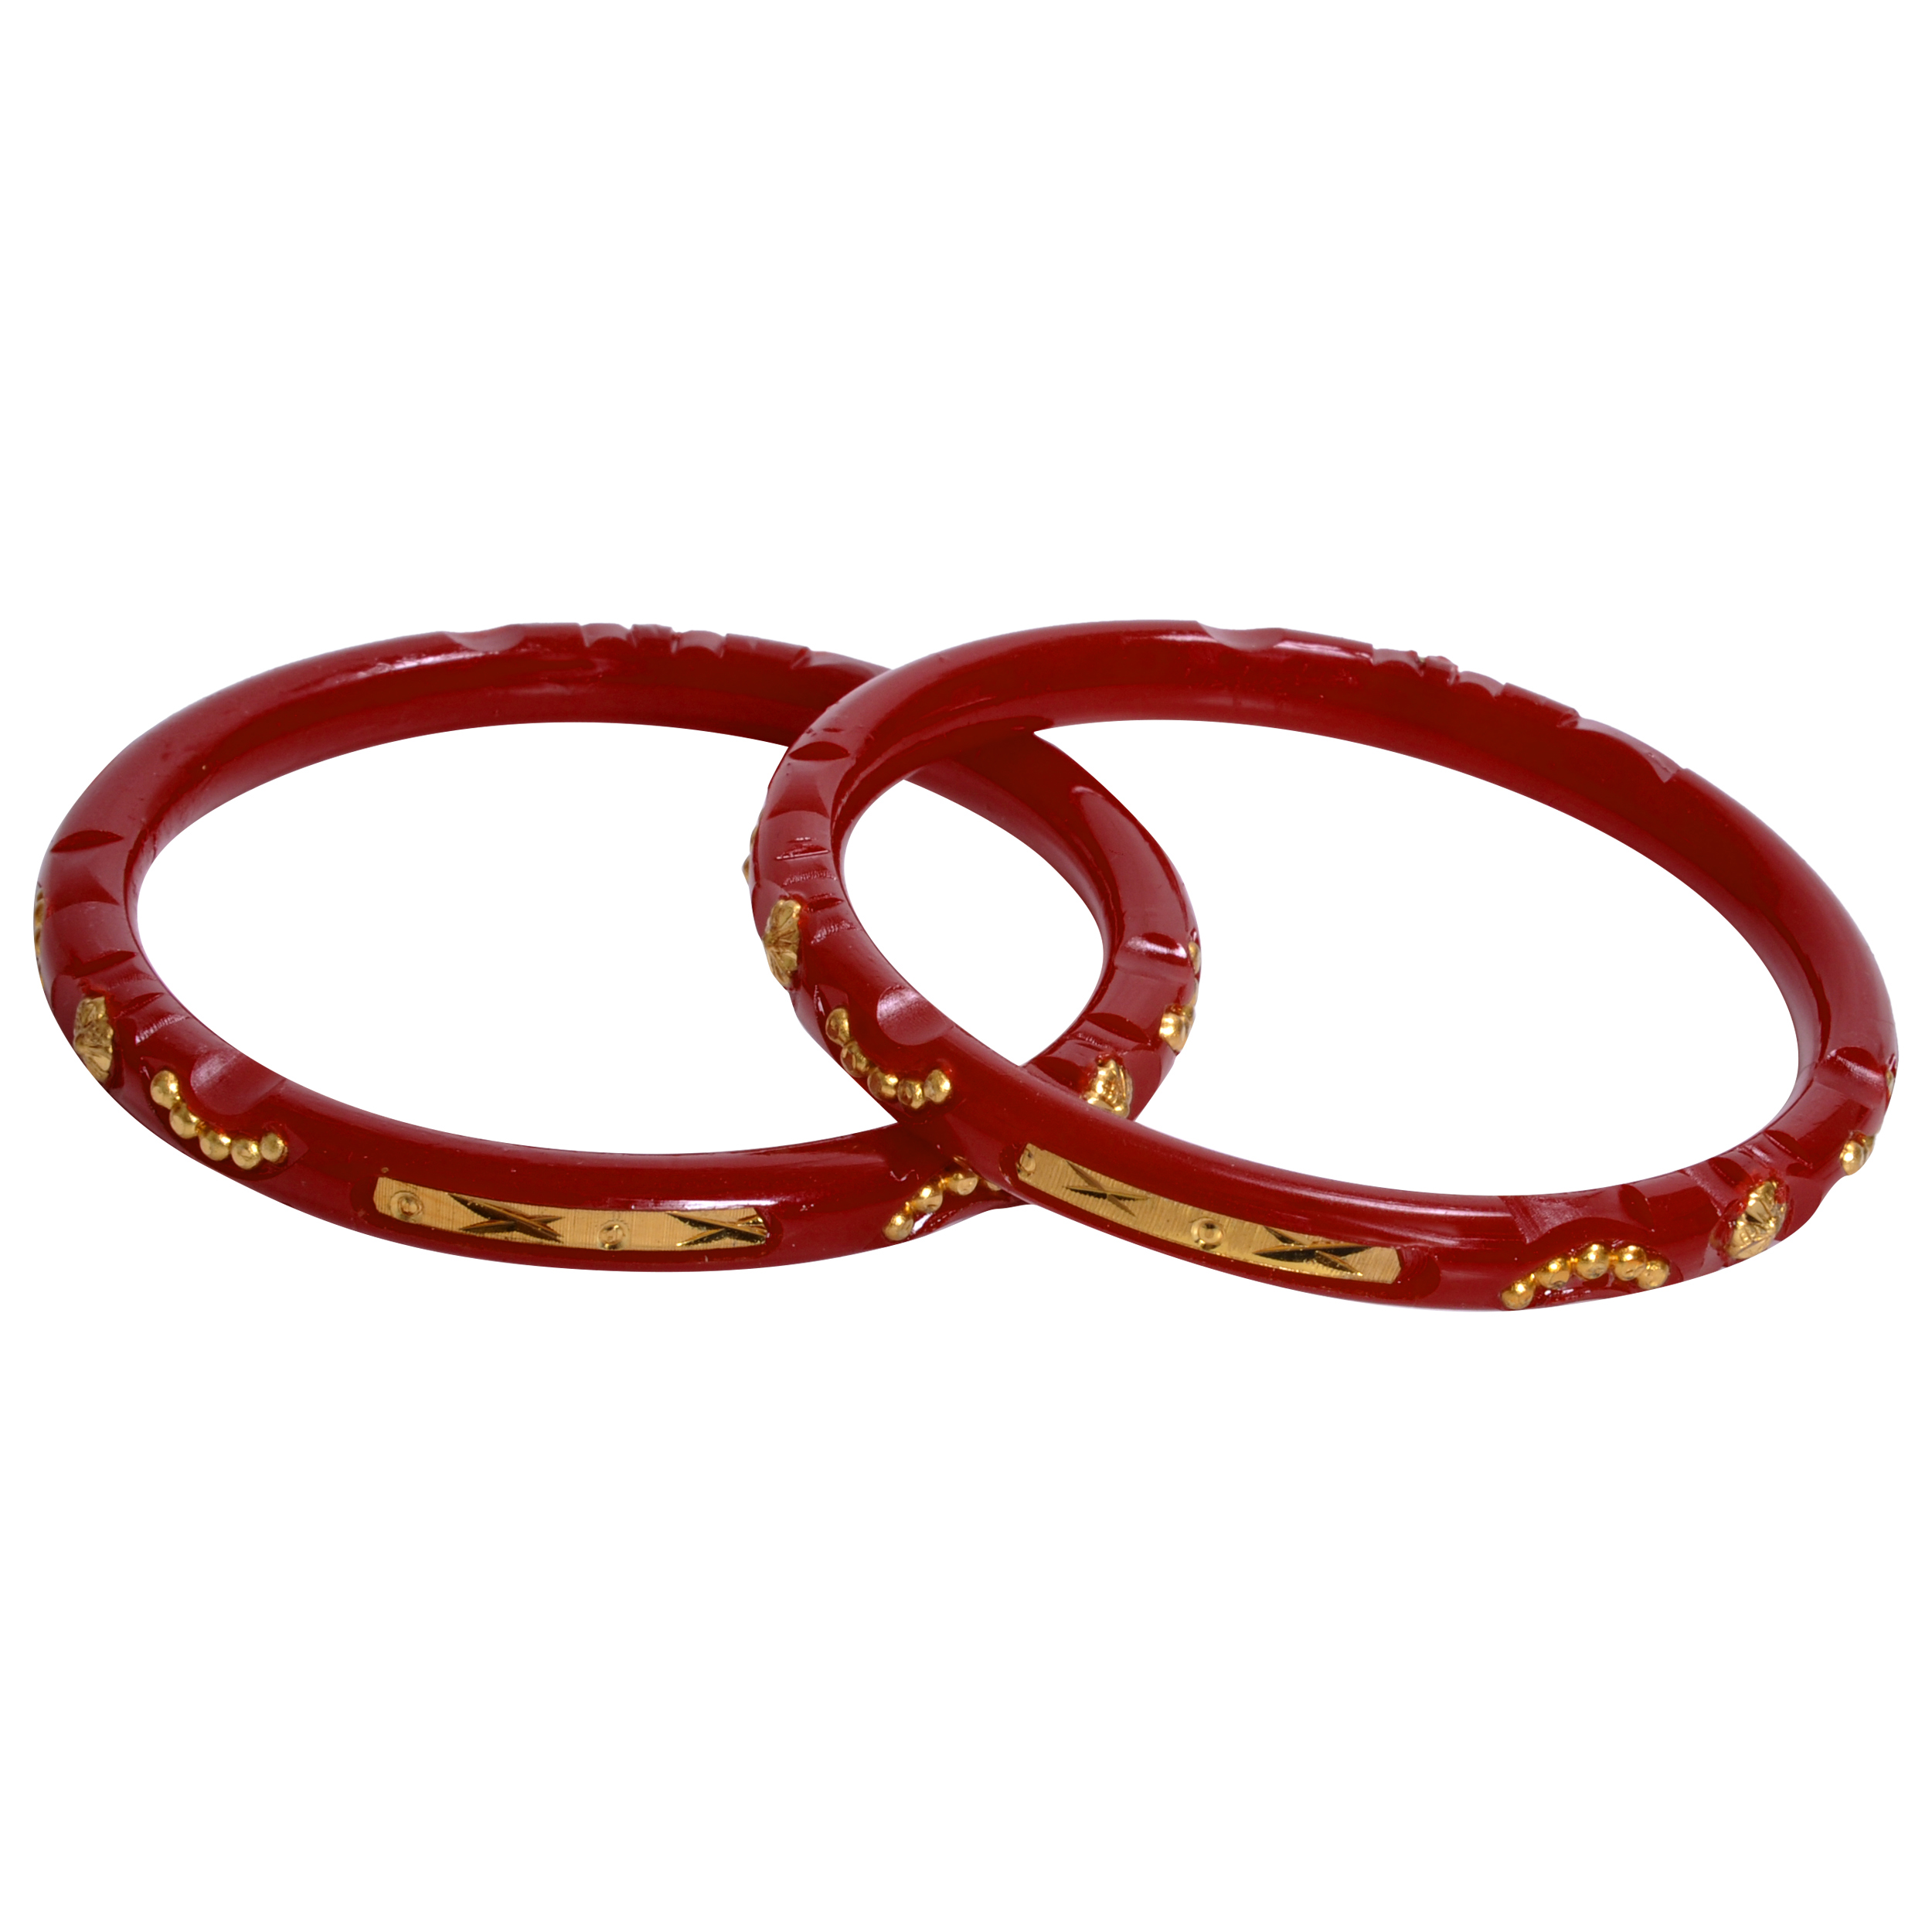 Sankha Pola Gold Bangles - Manufacturer Exporter Supplier from Hooghly India